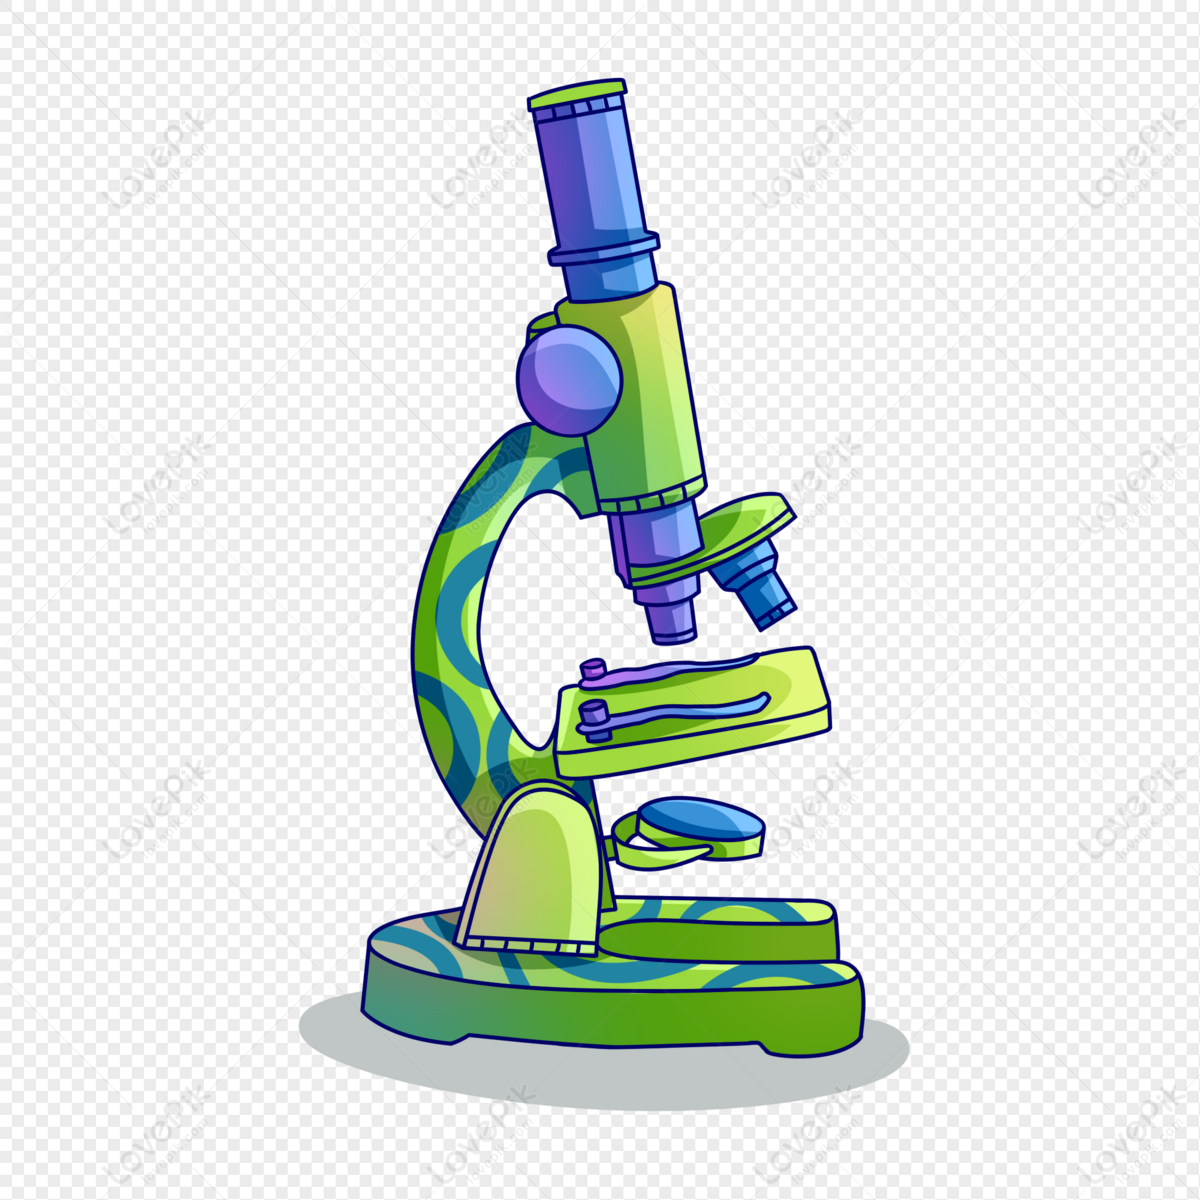 Cartoon Microscope PNG Hd Transparent Image And Clipart Image For Free  Download - Lovepik | 401485784